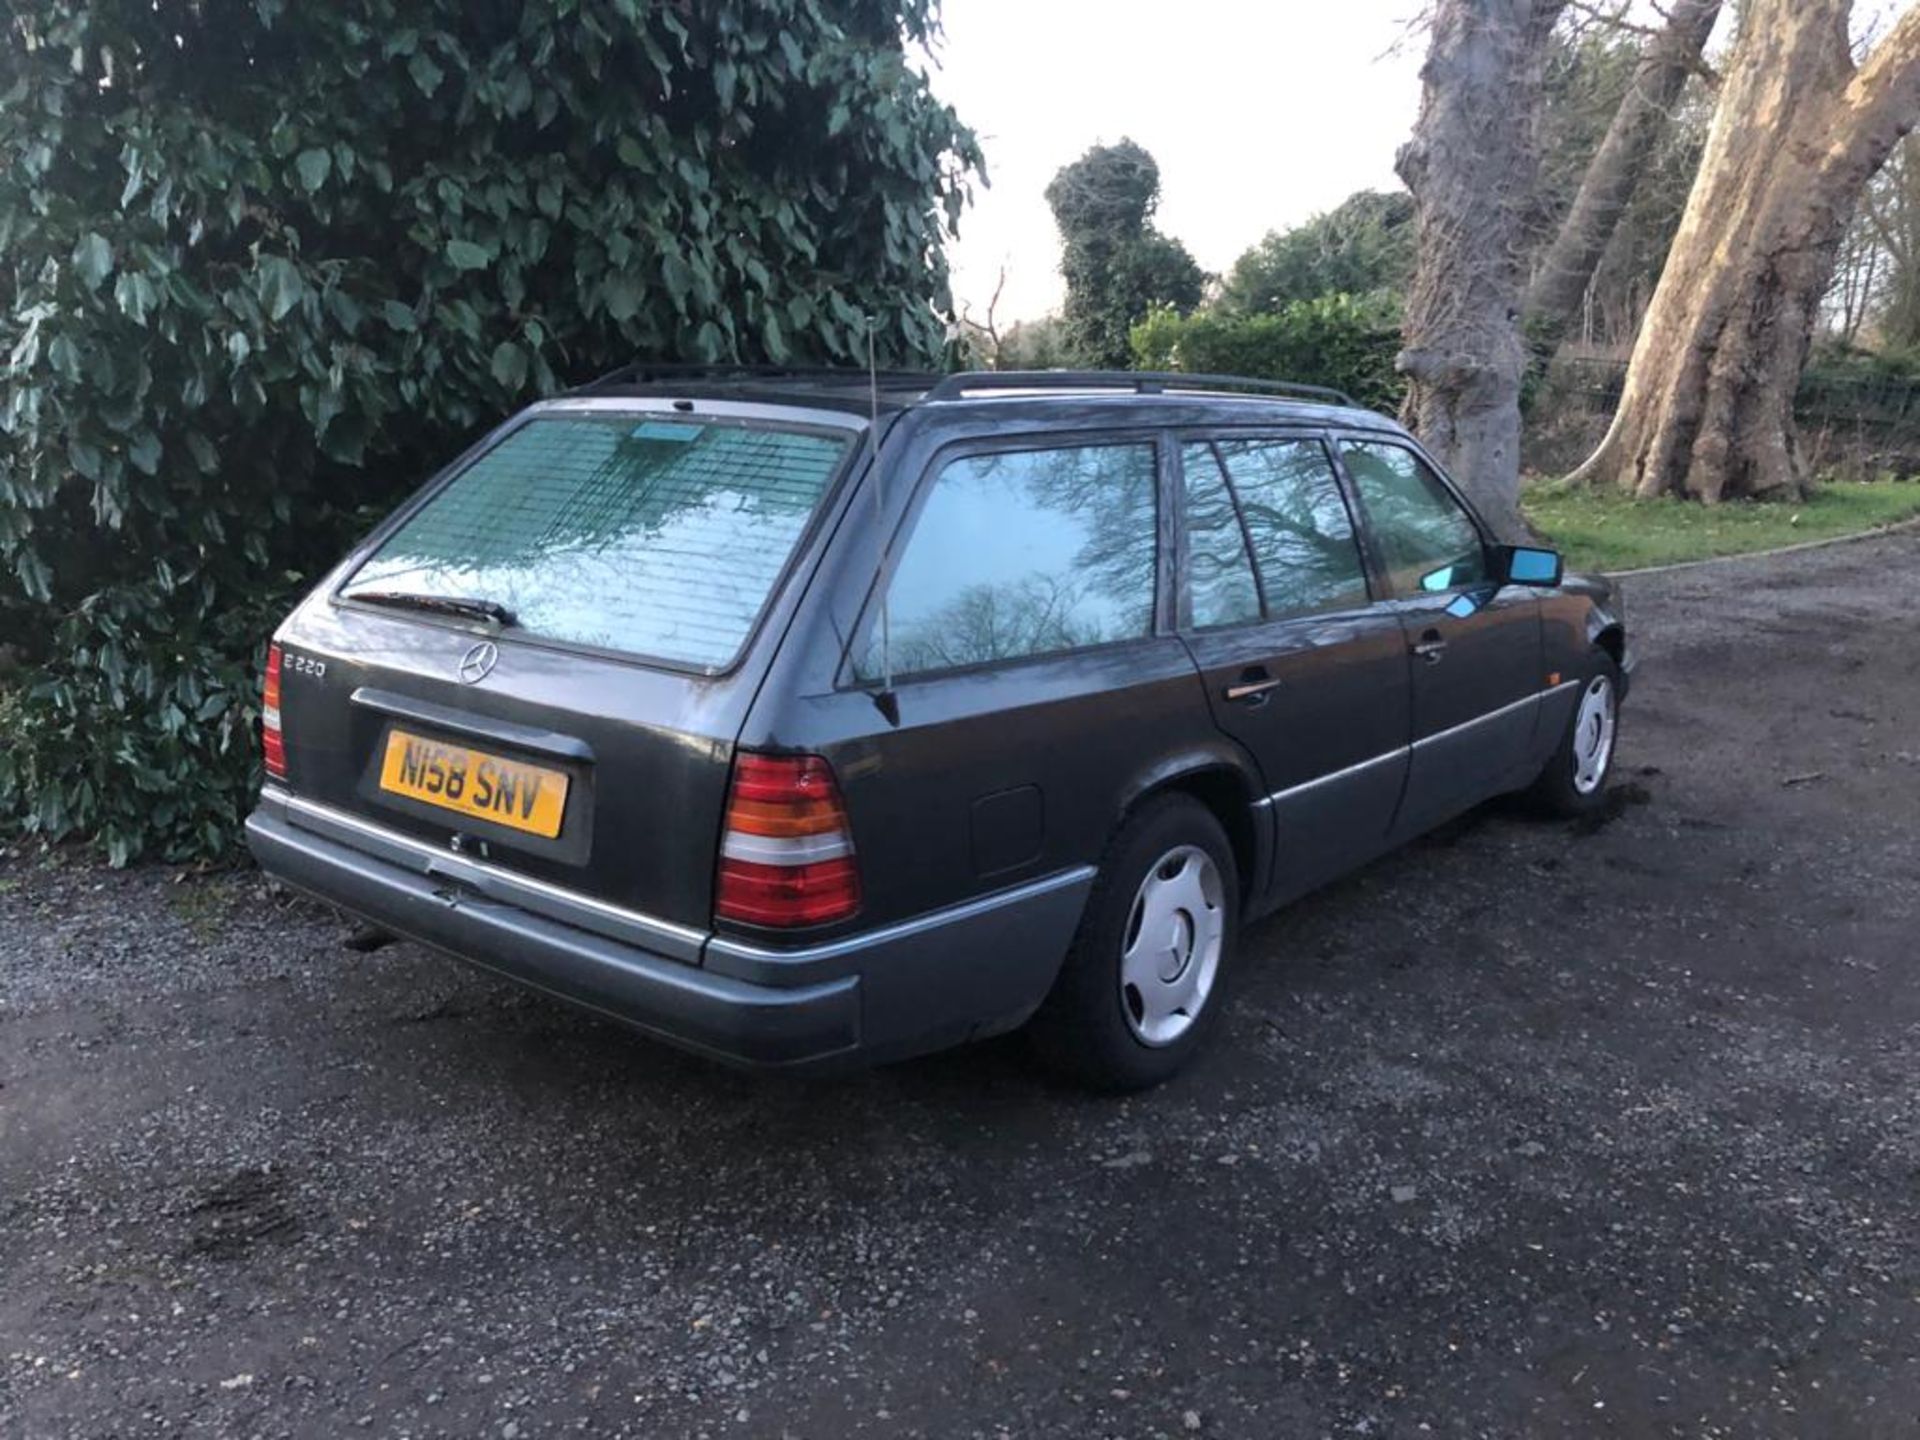 1995 MERCEDES E220 AUTO 2.2 PETROL ESTATE, 4 SPEED, 4 FORMER KEEPERS *NO VAT* - Image 5 of 21